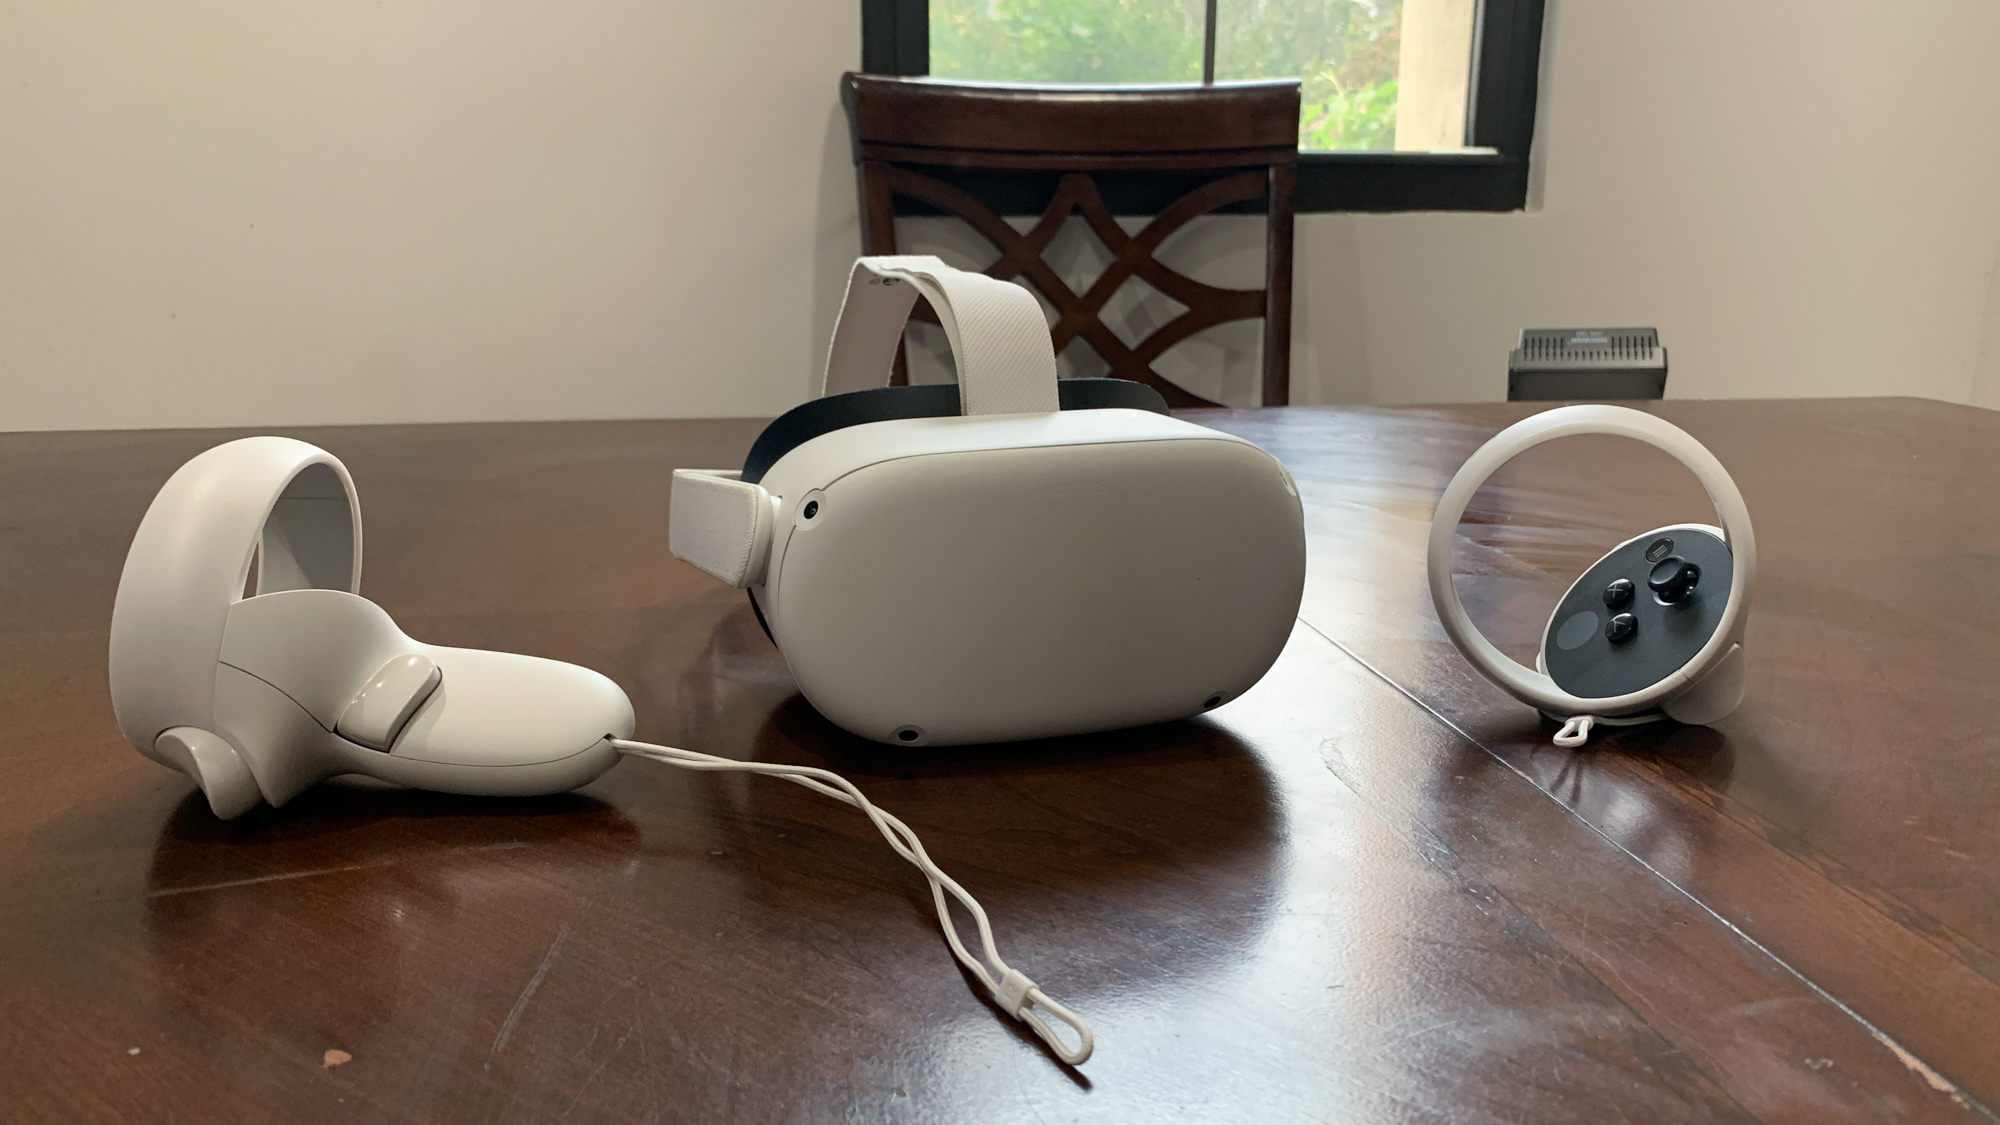 Meta Quest 2 review: The affordable VR headset we've been waiting